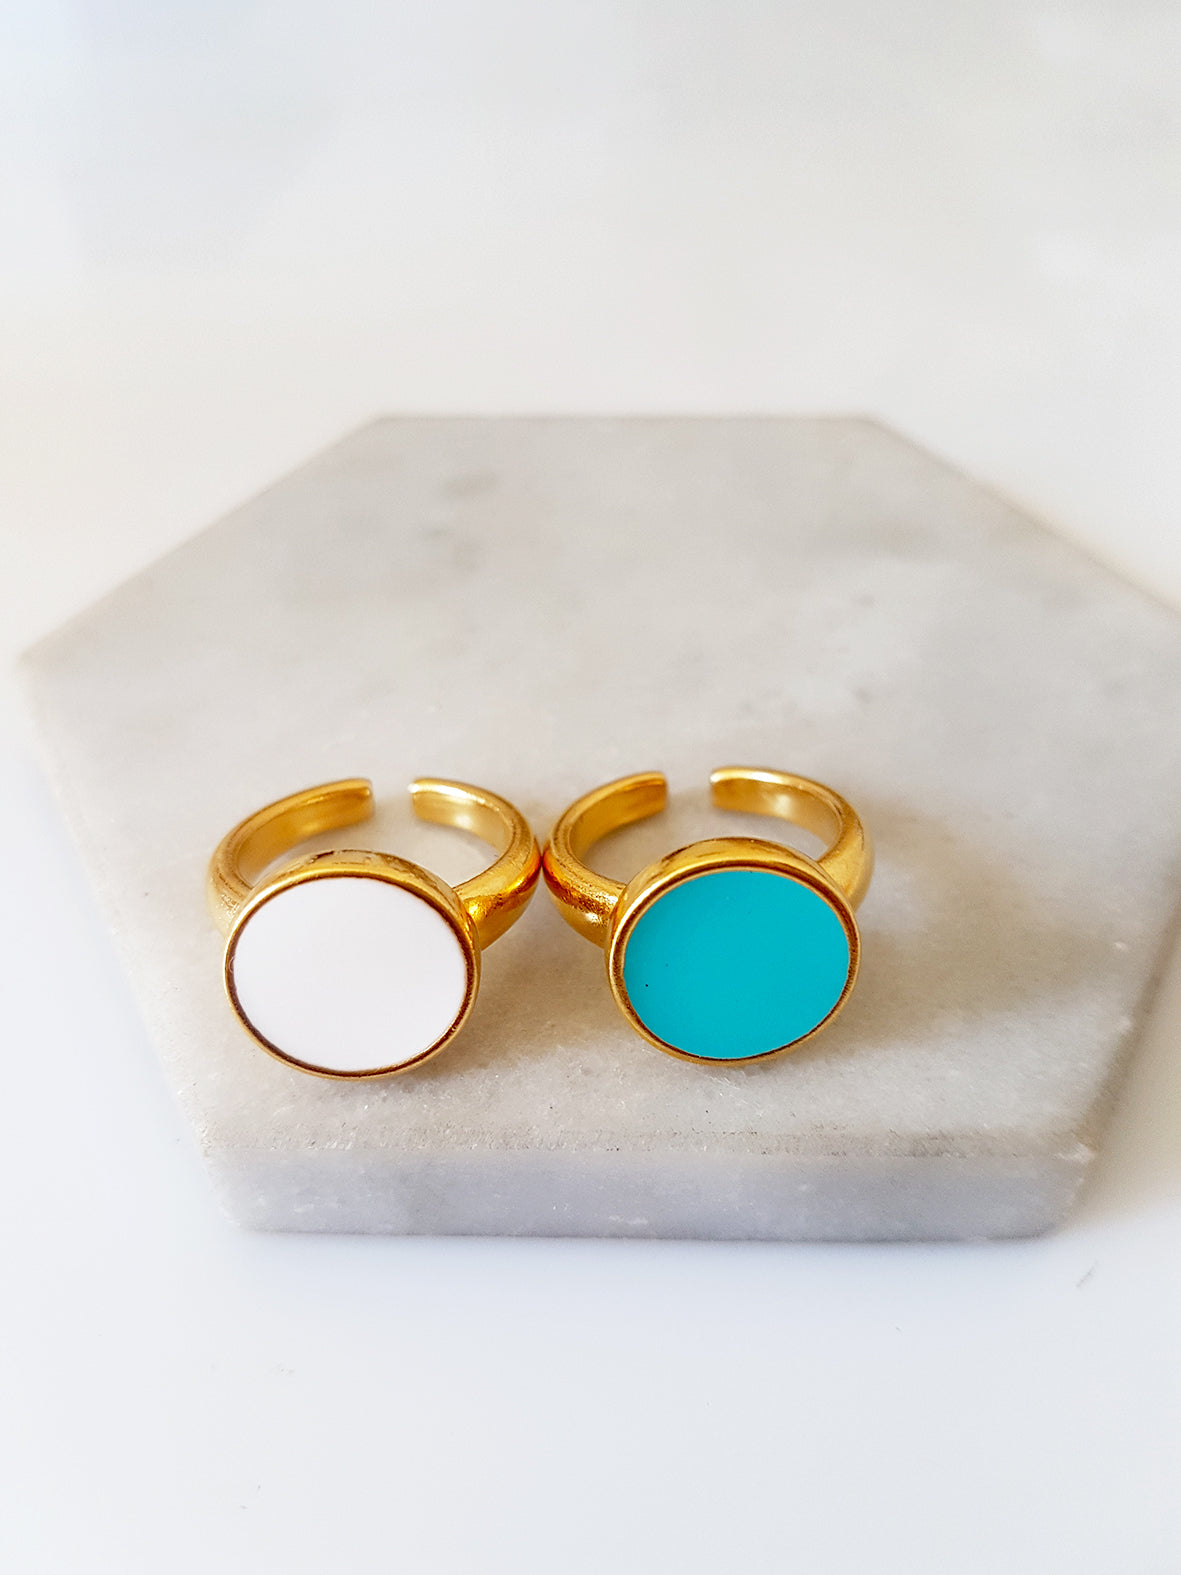 Round ring with enamel in a package of 3 pieces